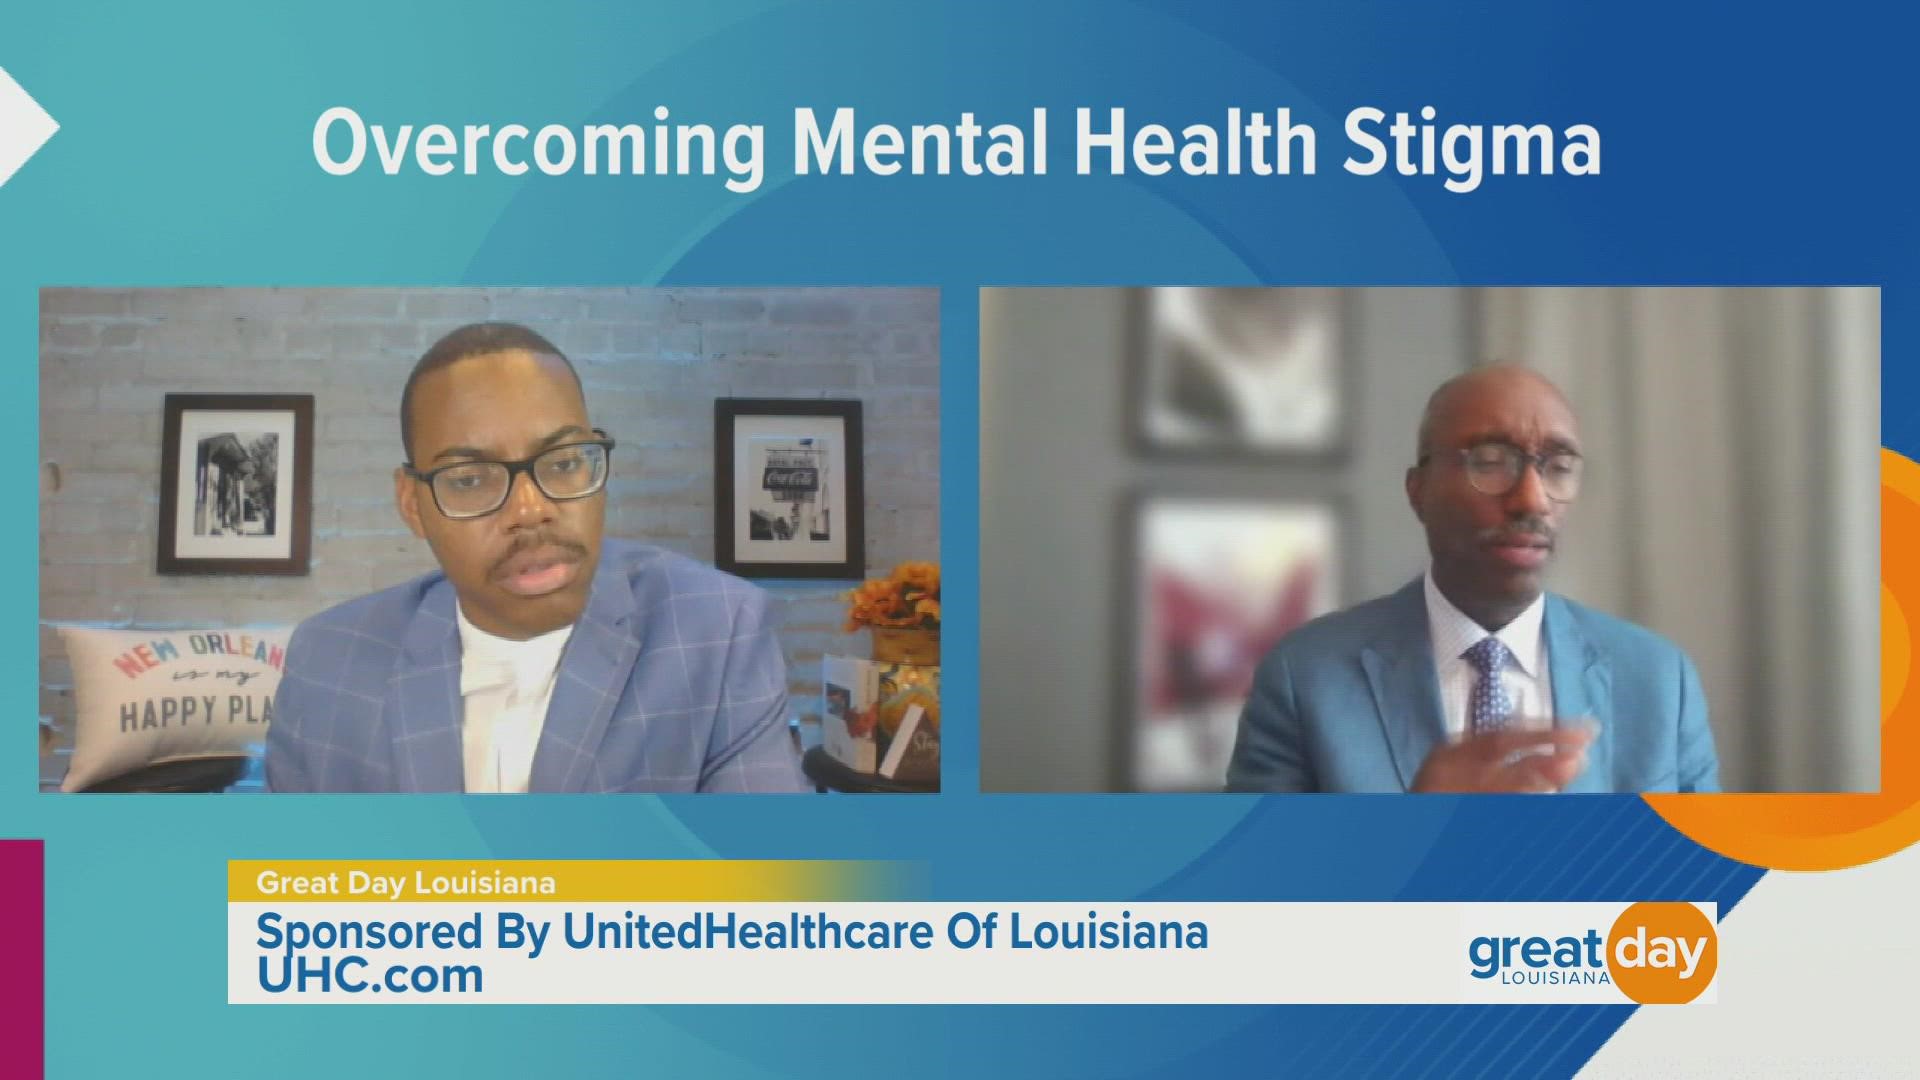 May is Mental Health Awareness Month, and Dr. Kevin Stephens explains how mental health impacts every part of our lives.